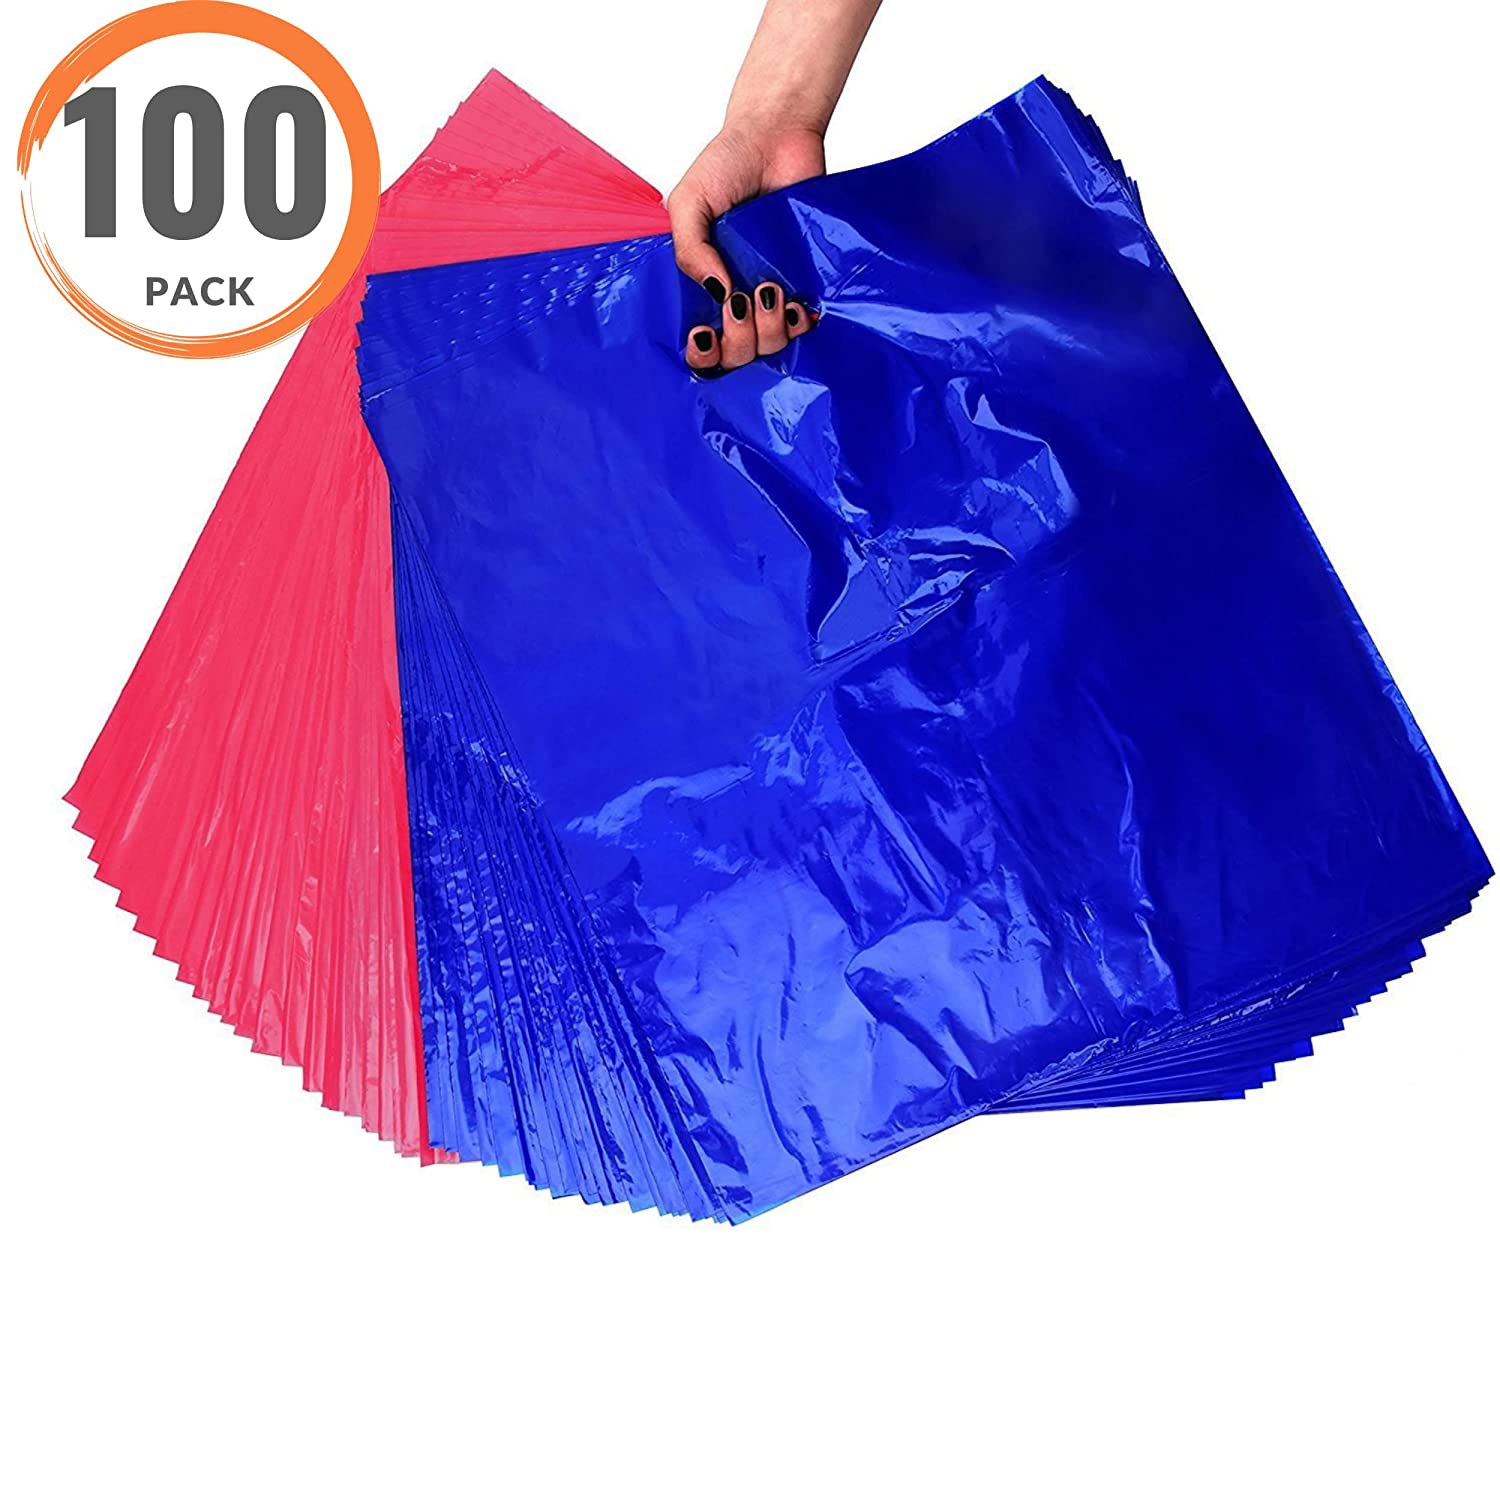 Extra Large Plastic Die Cut Shopping Bag